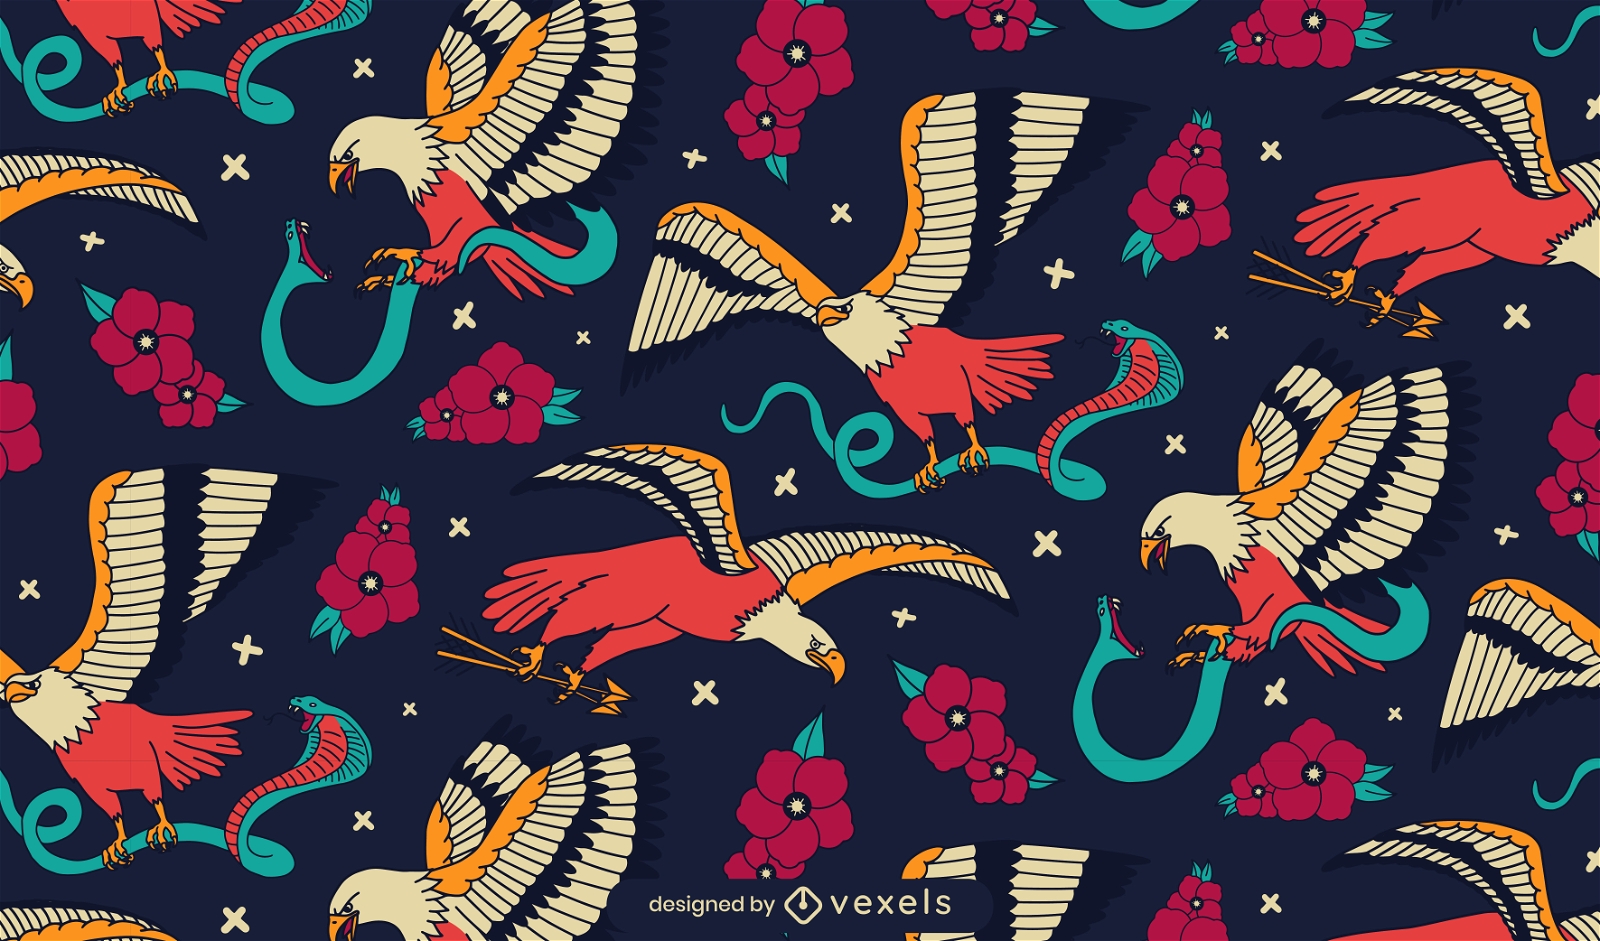 Eagles with snakes and flowers pattern design